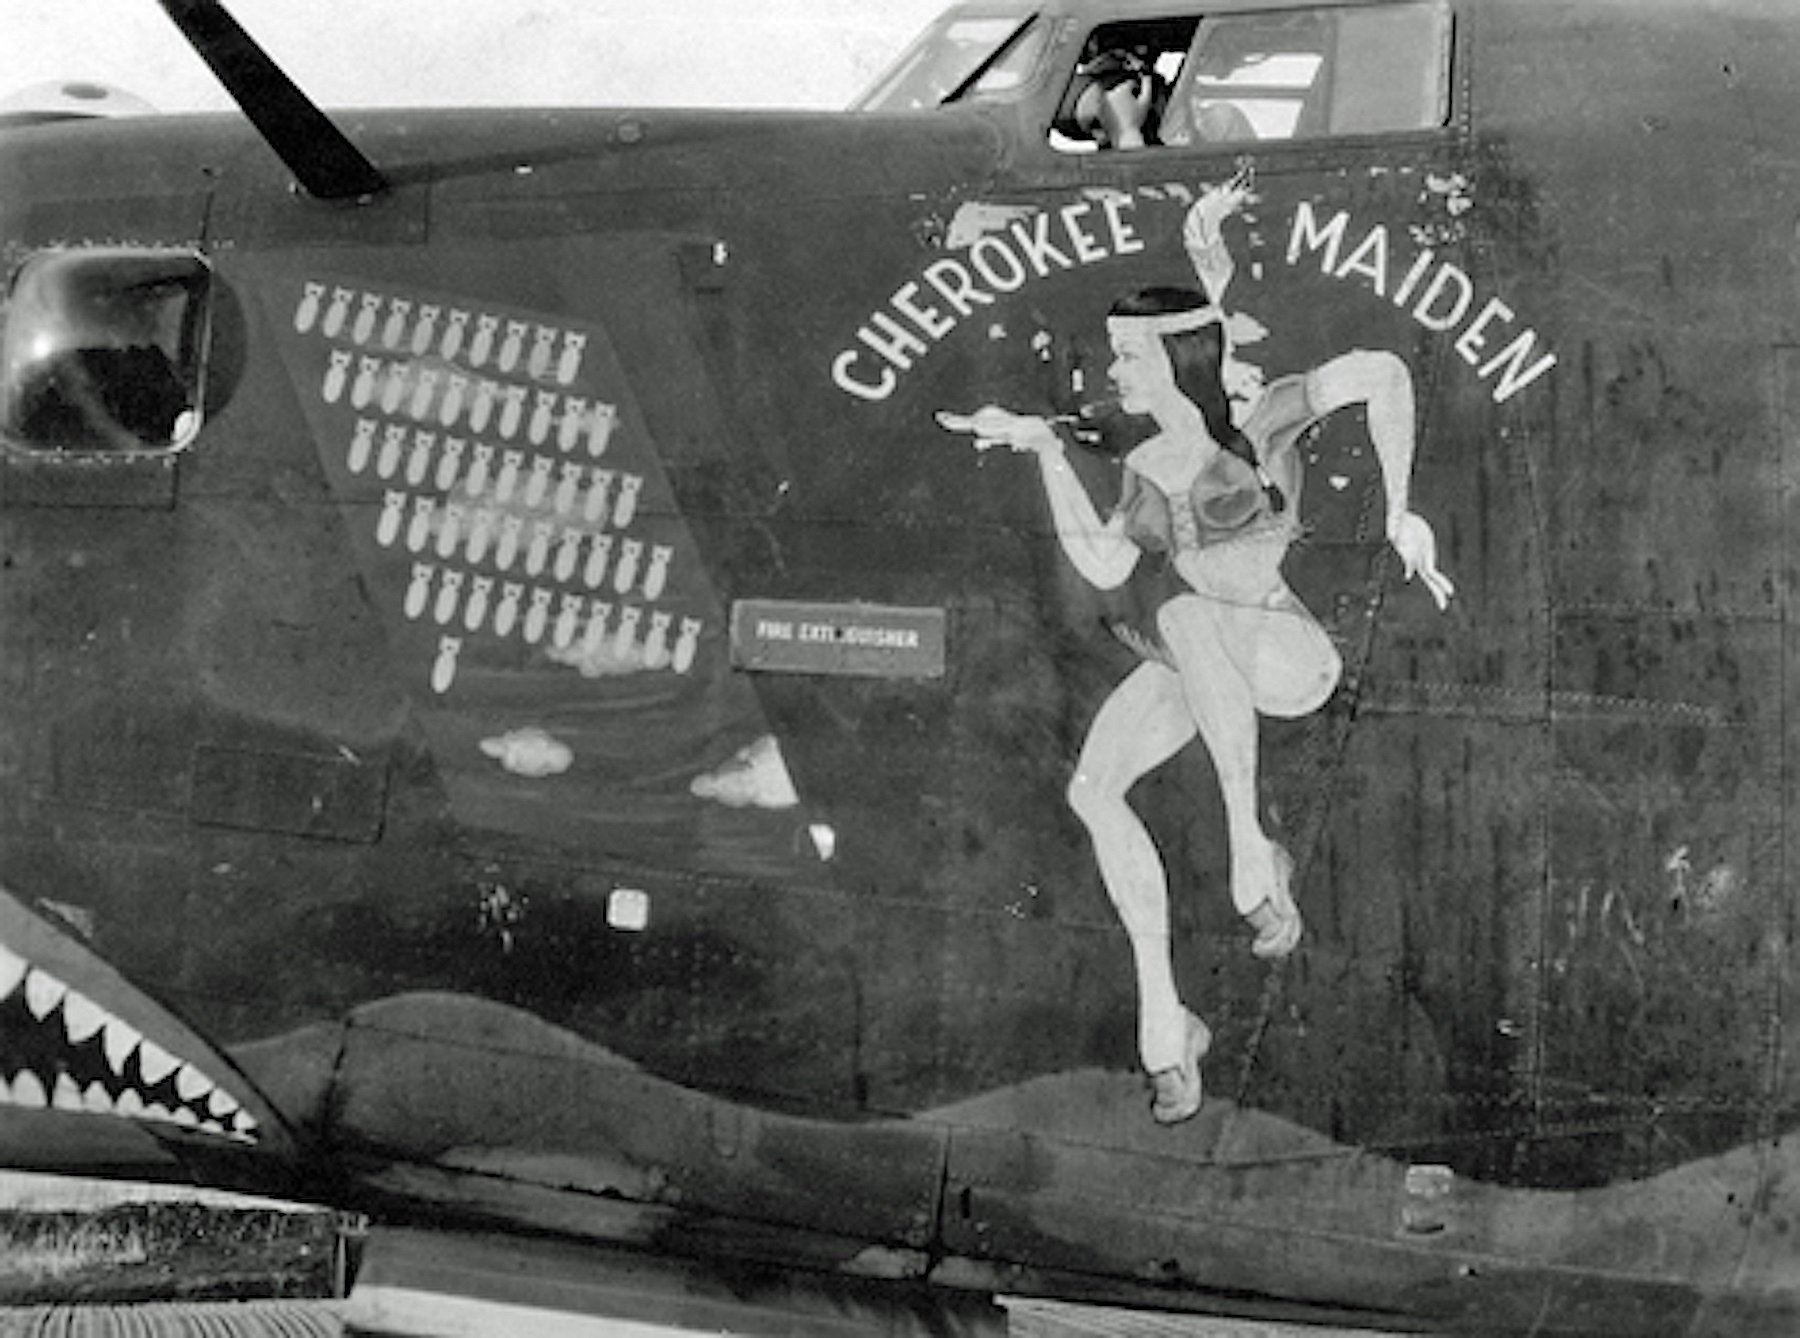  Cherokee Maiden- B-24 of the 459th Bomb Group 